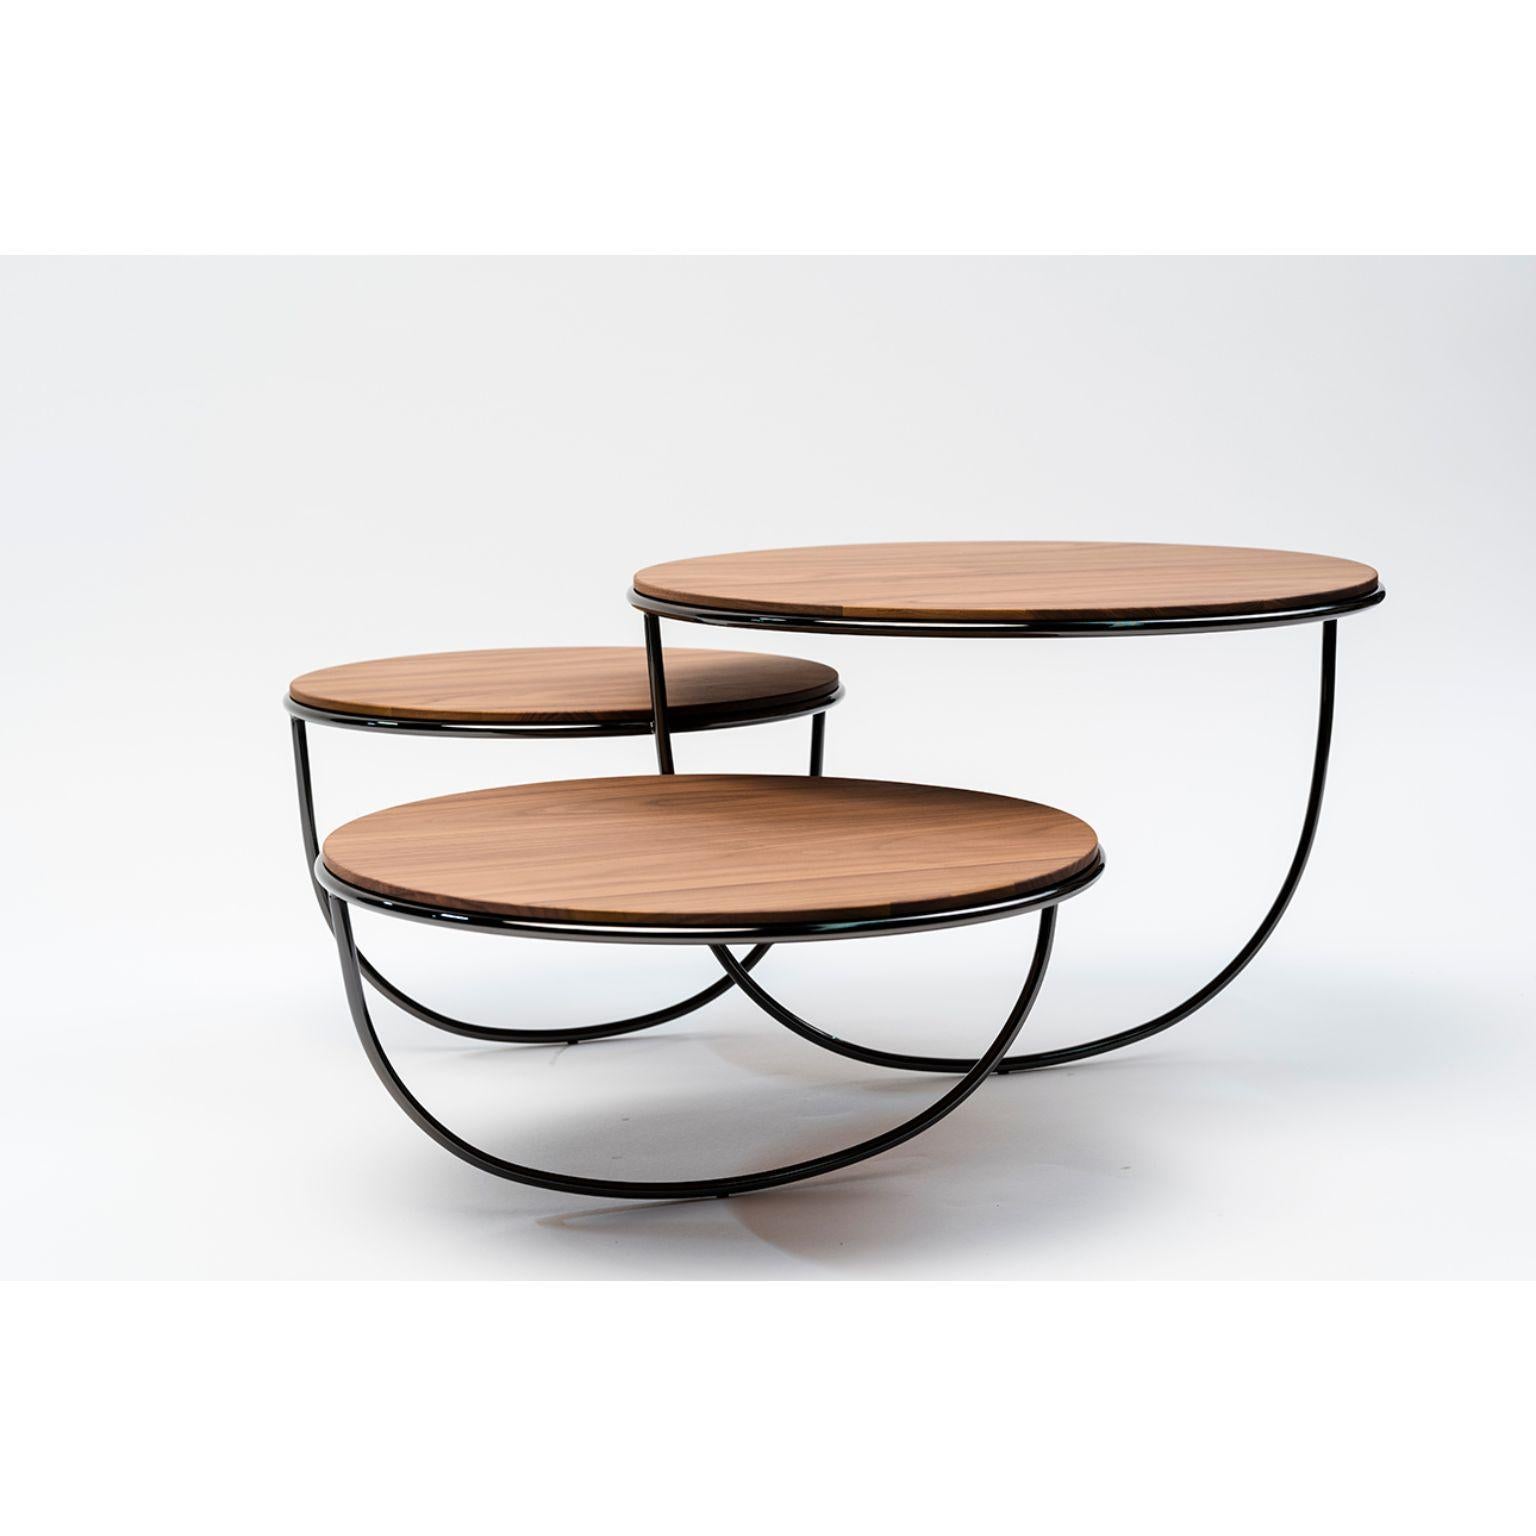 Trio side table by Nendo.
Materials: top: noce Canaletto solid wood, glass or metal.
 Structure: black chrome metal, black/Light grey /coral /dark 
 Green powder-coated metal.
Dimensions: W84.7 x D76.3 x H33.9 cm.

 

At first sight, Trio is